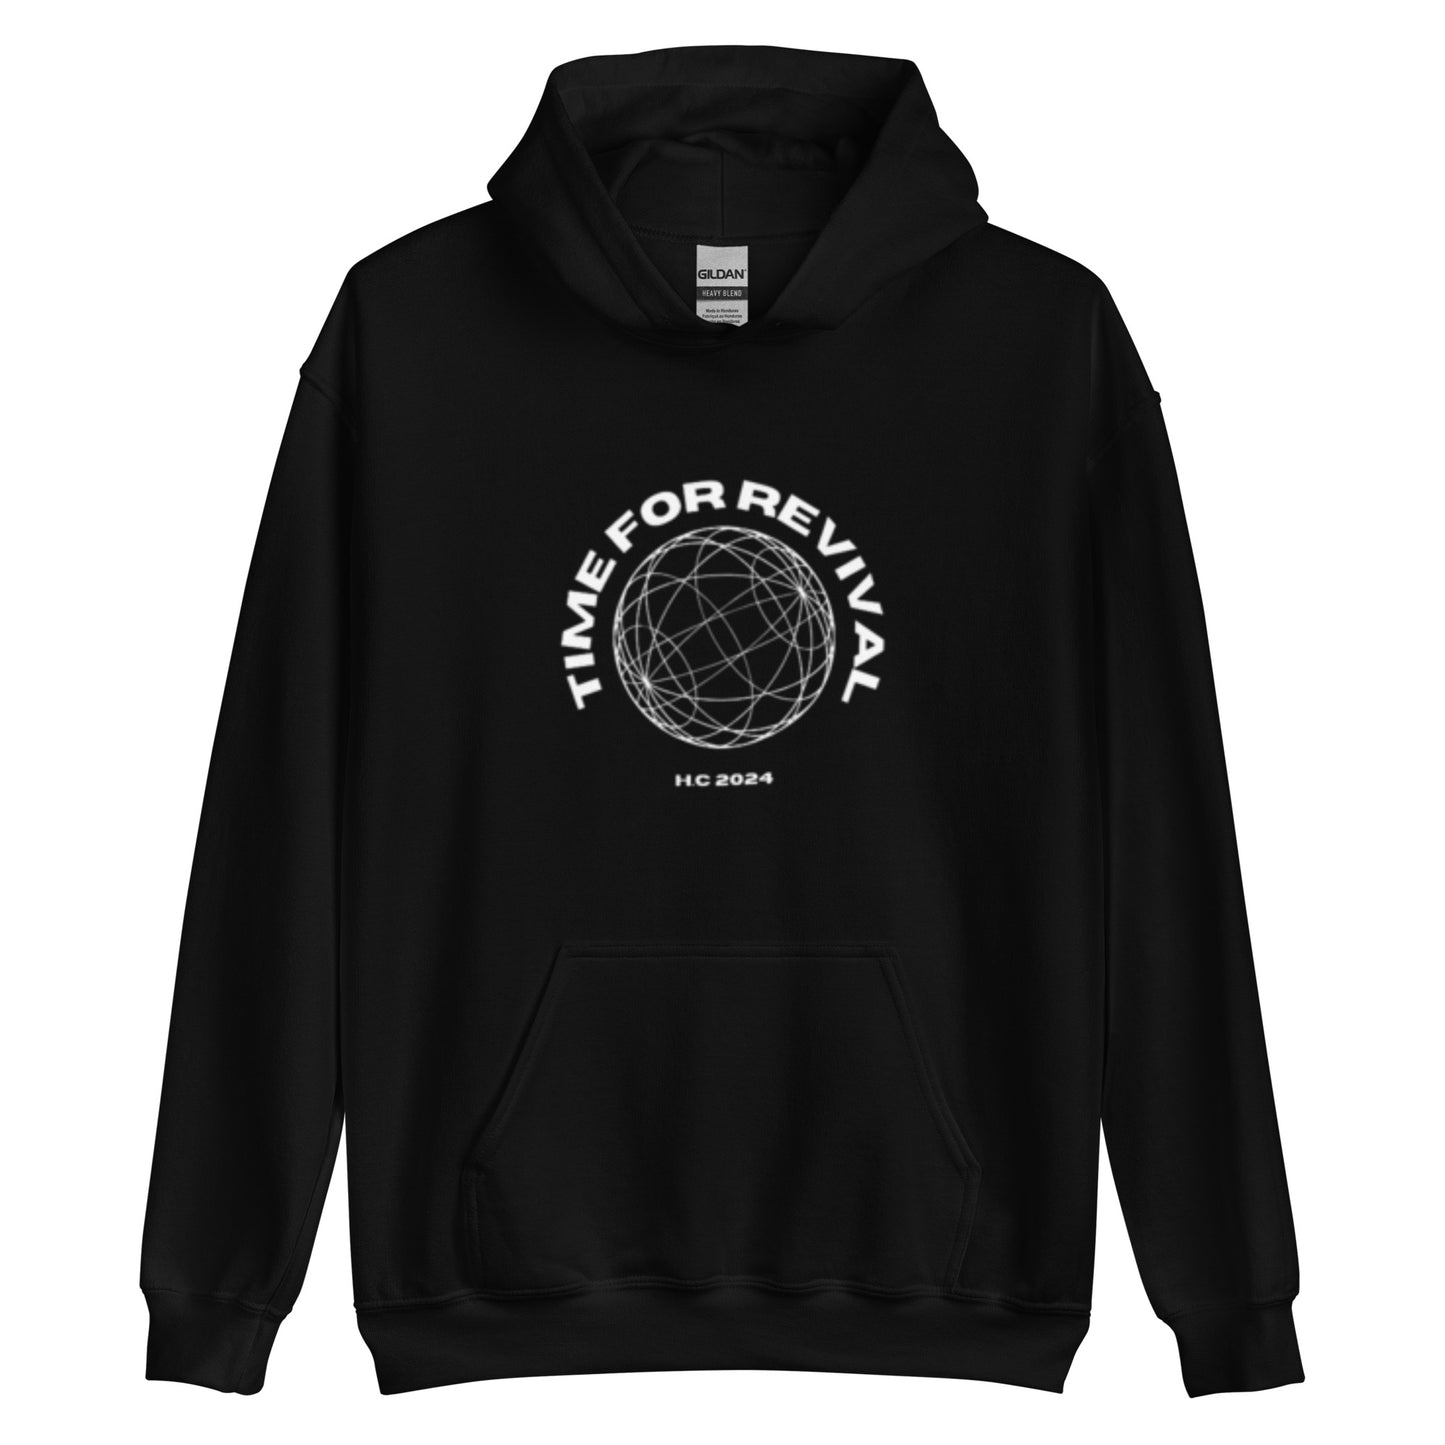 Time for revival - Hoodie